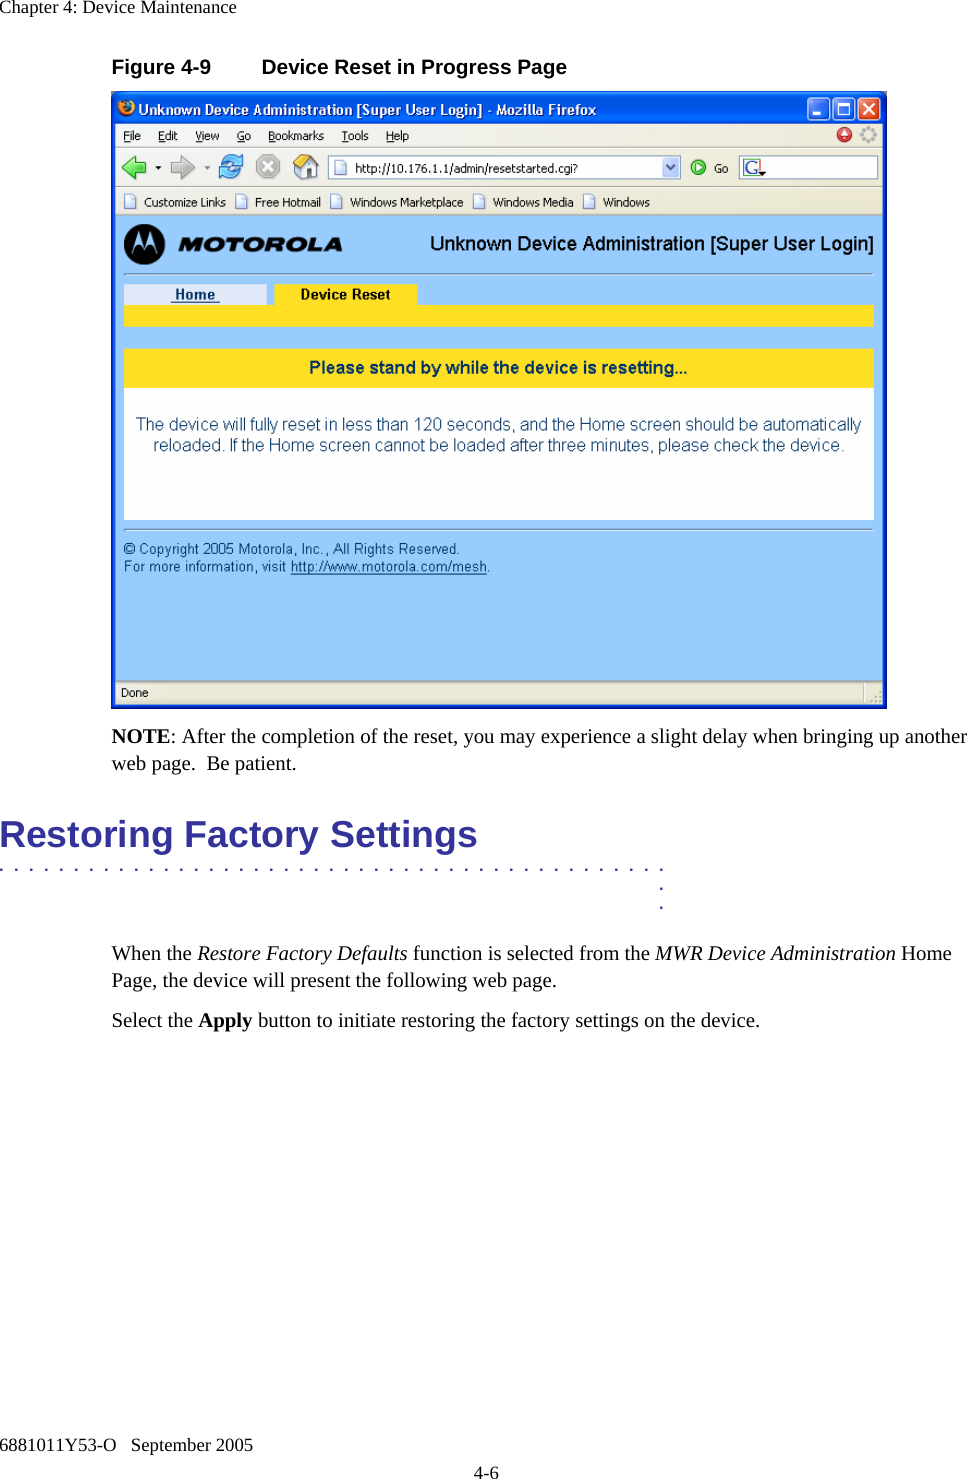 Chapter 4: Device Maintenance 6881011Y53-O   September 2005 4-6 Figure 4-9  Device Reset in Progress Page  NOTE: After the completion of the reset, you may experience a slight delay when bringing up another web page.  Be patient. Restoring Factory Settings .............................................  .  . When the Restore Factory Defaults function is selected from the MWR Device Administration Home Page, the device will present the following web page. Select the Apply button to initiate restoring the factory settings on the device. 